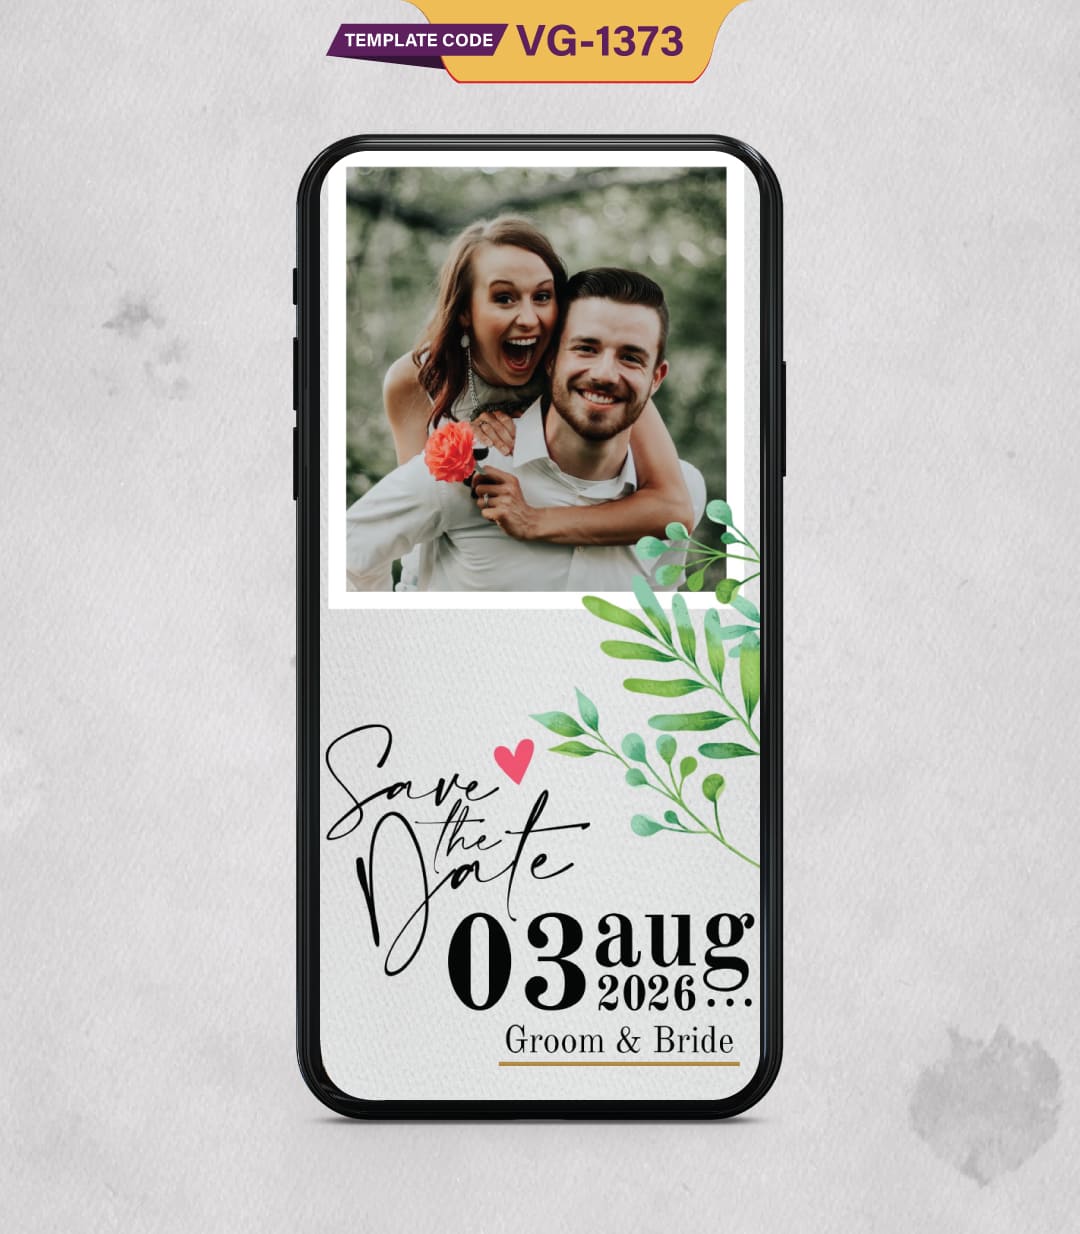 Wedding Save The Date Invite Card